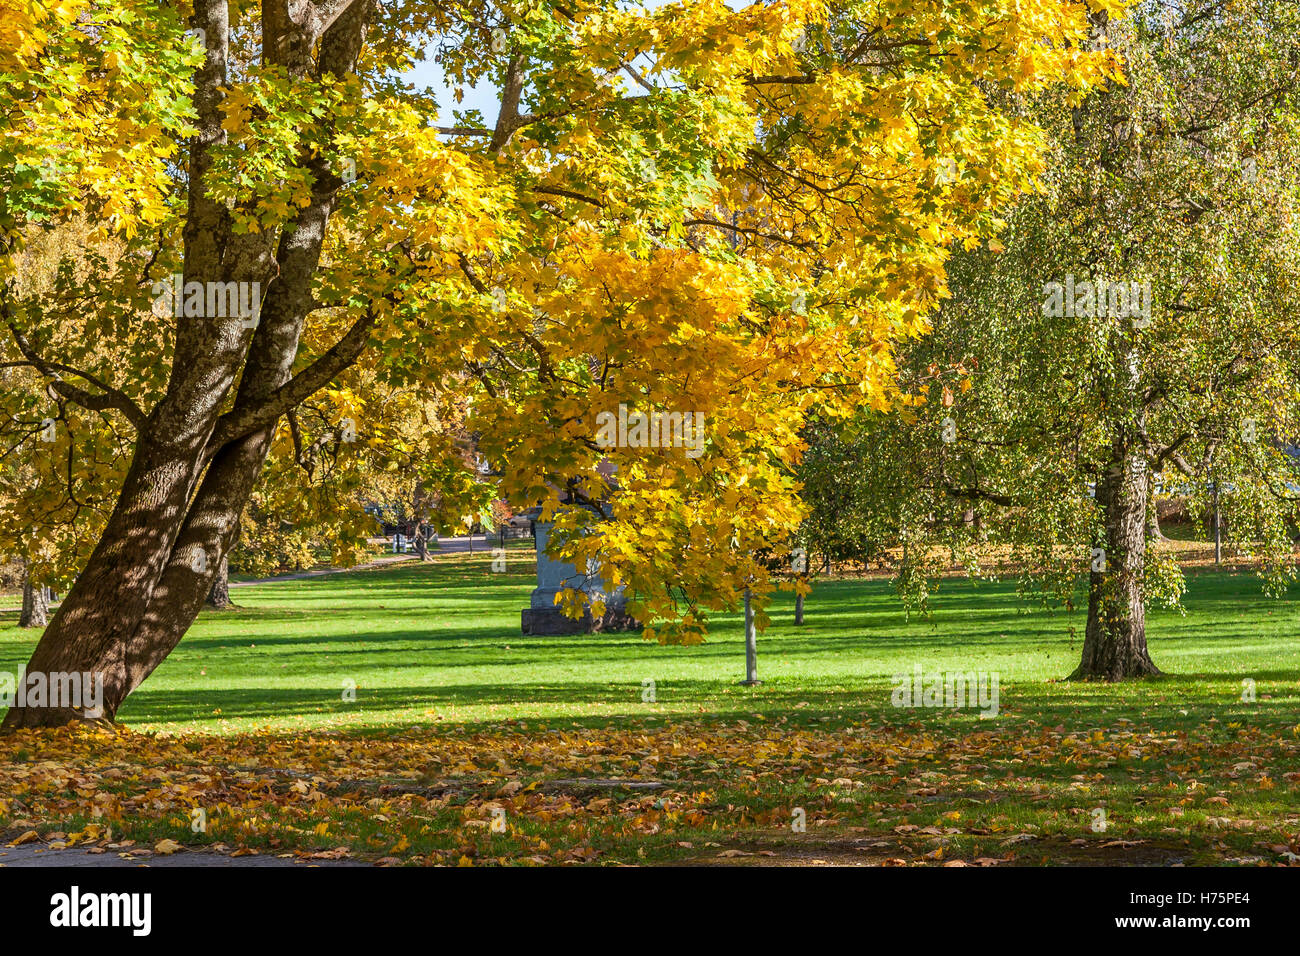 Autumn Leaves Falling From Maple Tree Stock Photo